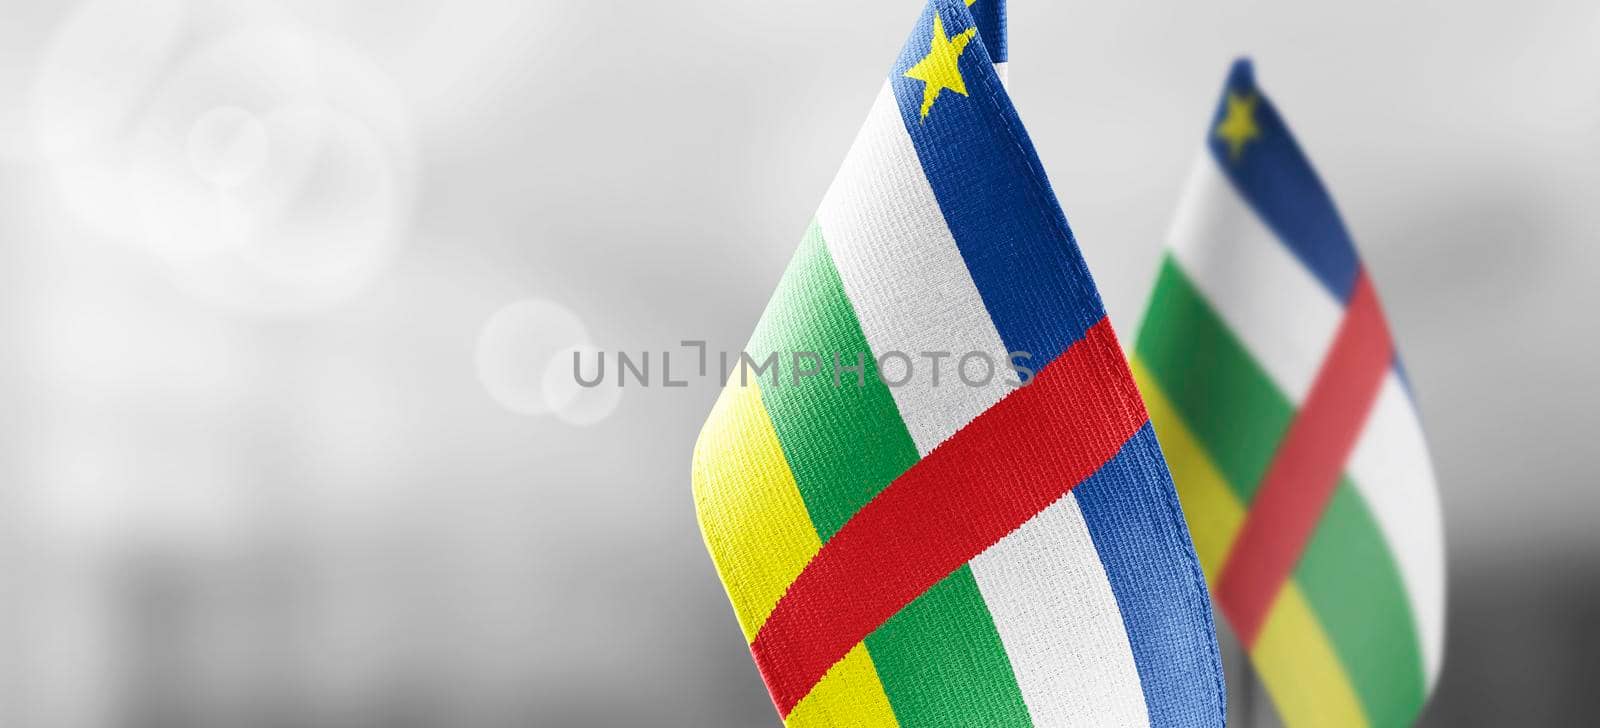 Patch of the national flag of the Central African Republic on a white t-shirt.